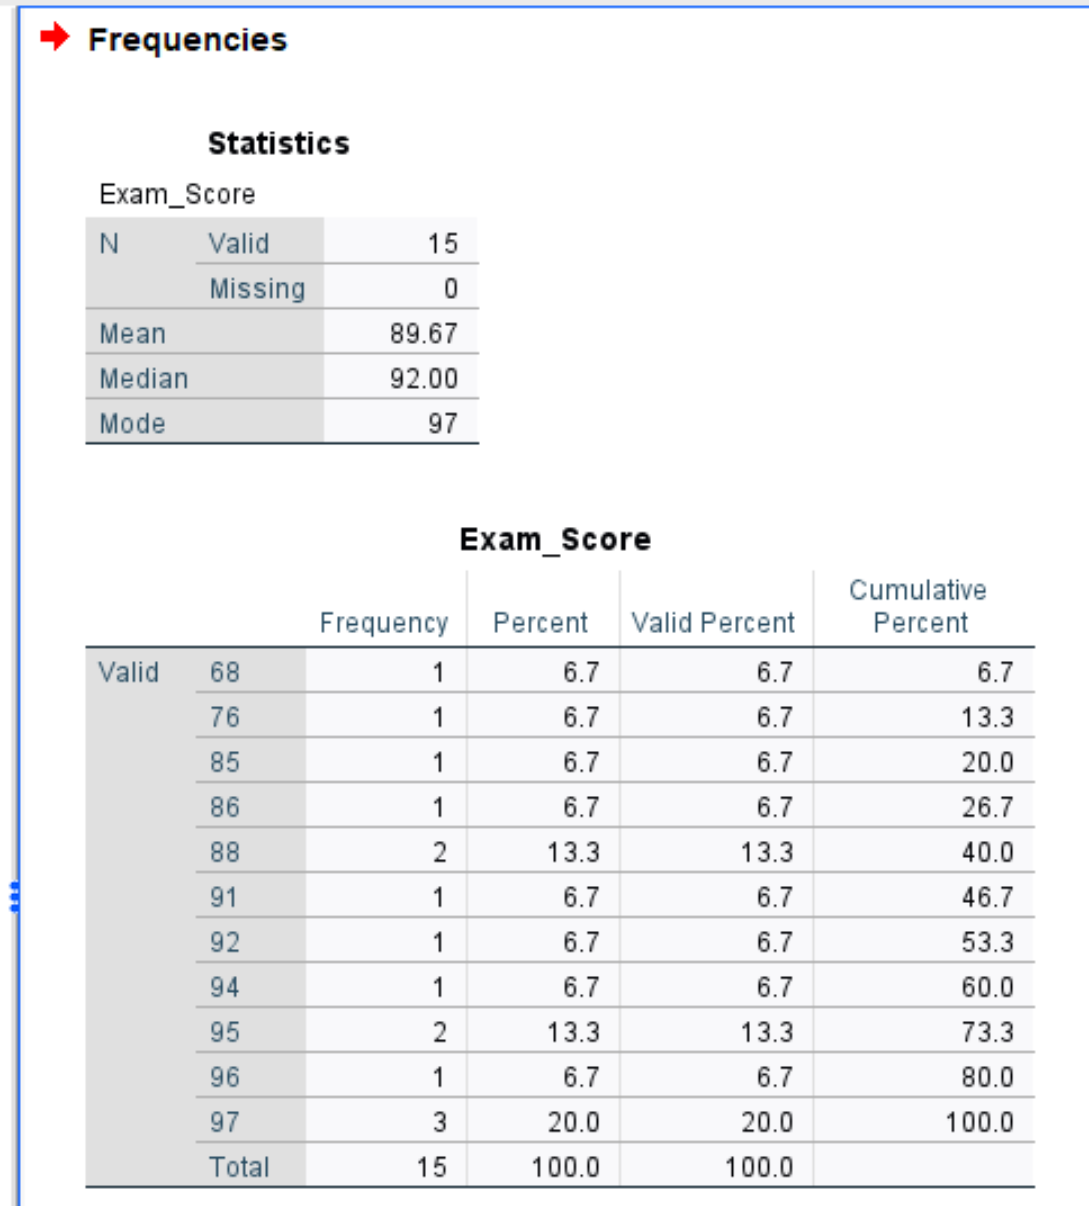 SPSS mean median and mode